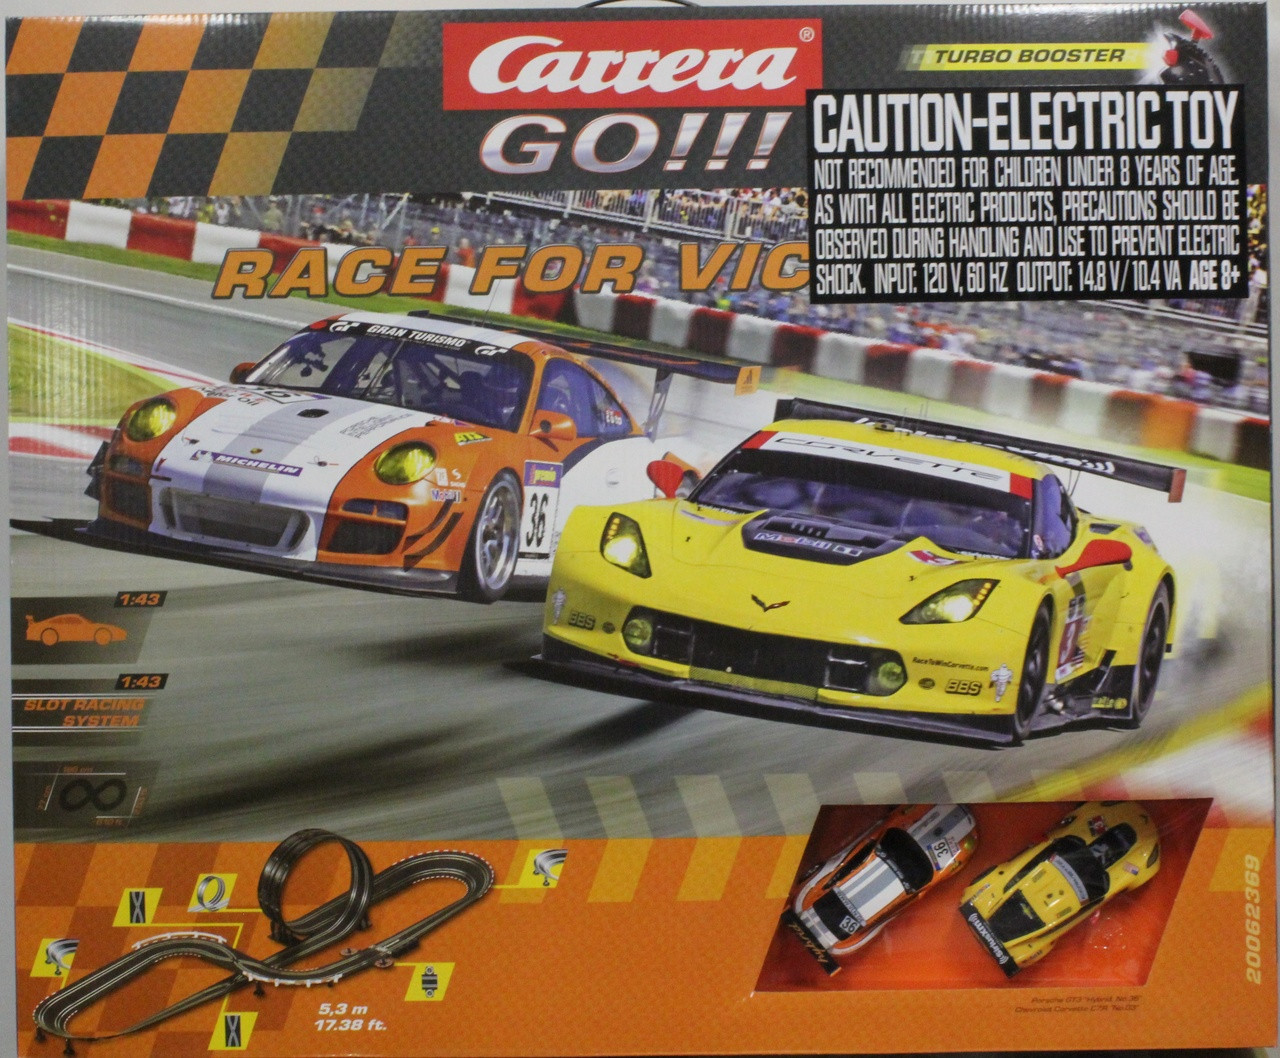 62369 Carrera Go!!! Race for Victory 1:43 Slot Car Set - Great Traditions